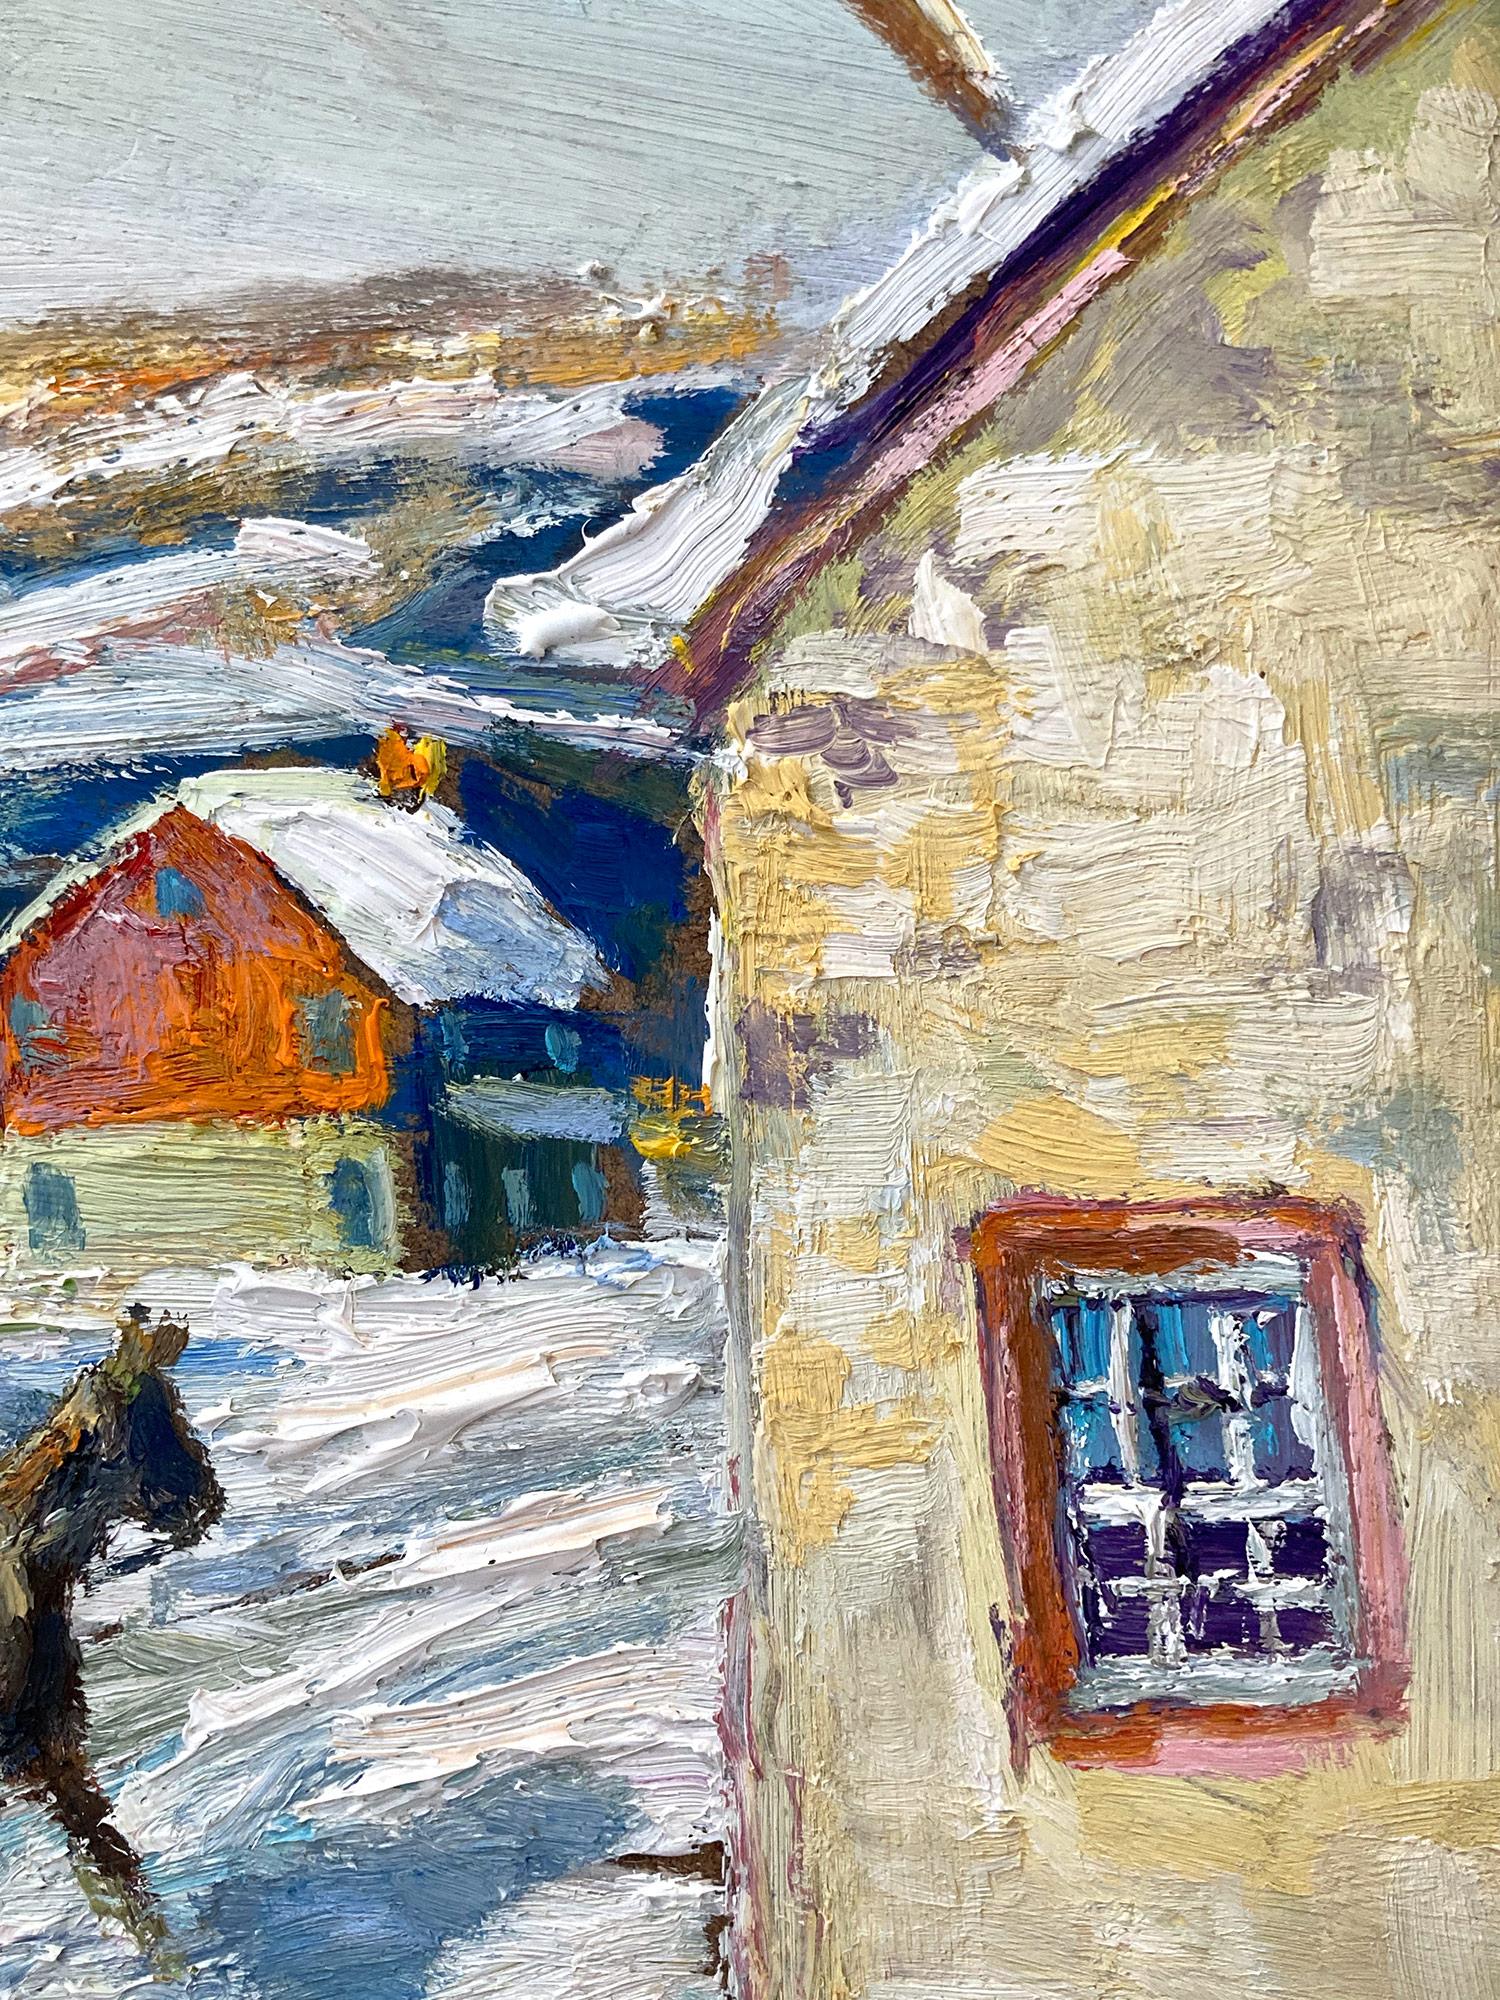 Impressionist winter pastoral scene of a quaint snow covered town with Figure on Sleigh and Horse by Bucks County, PA. Willett has portrayed this charming piece in a most intimate, yet energetic way, and has packed much feeling into this miniature